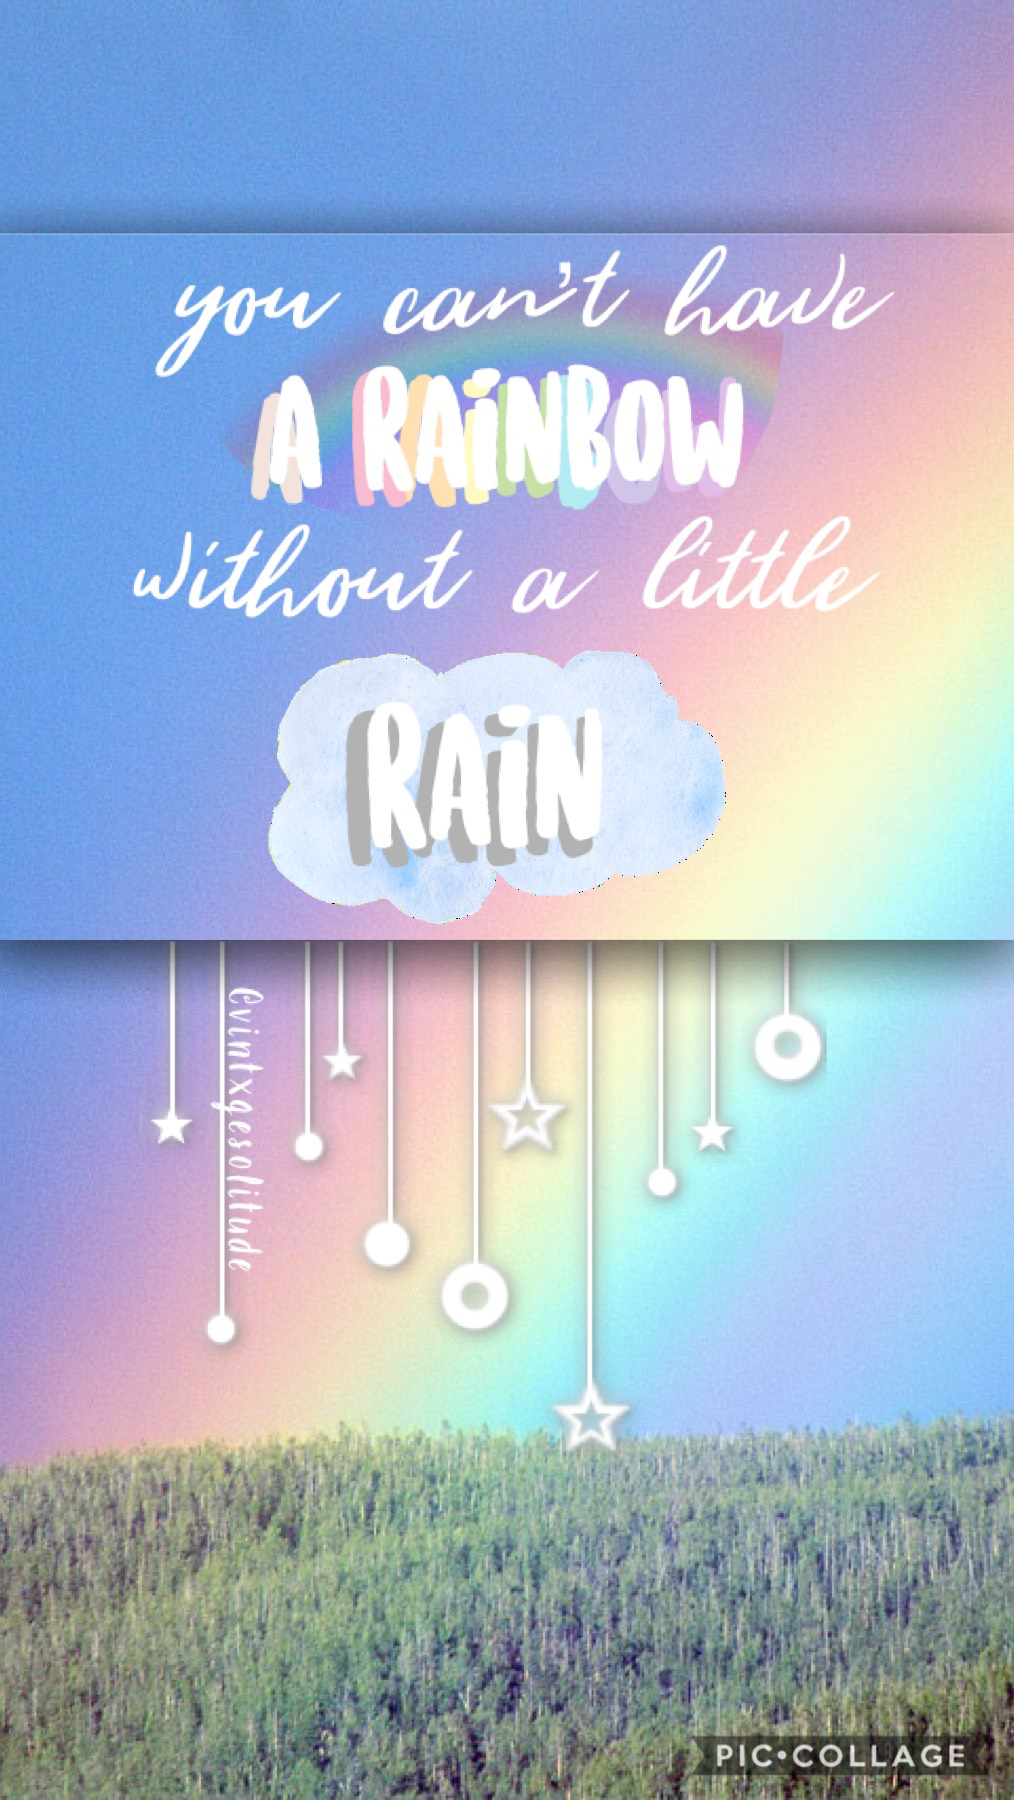 💗 tip tap 🌈🌸
“you can’t have a rainbow without a little rain”
also ah i love love love the new fonts thank you pic collage 💗💗💗
@vintxgesolitude